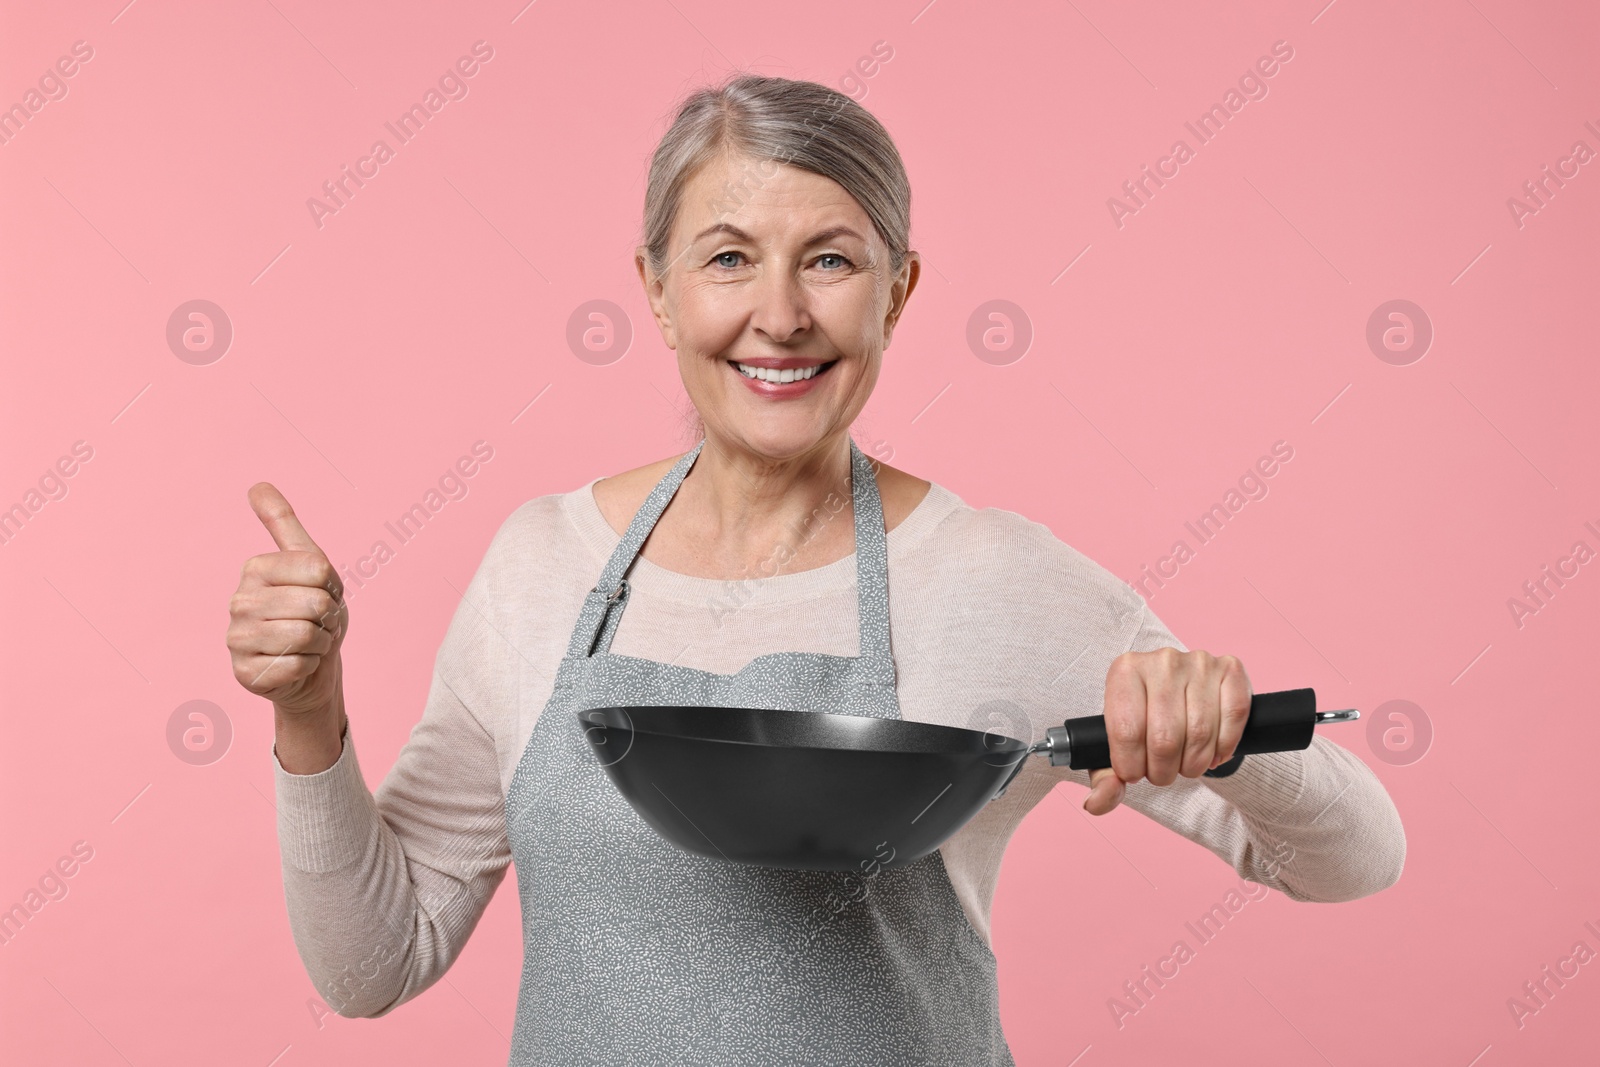 Photo of Happy housewife with frying pan showing thumbs up on pink background